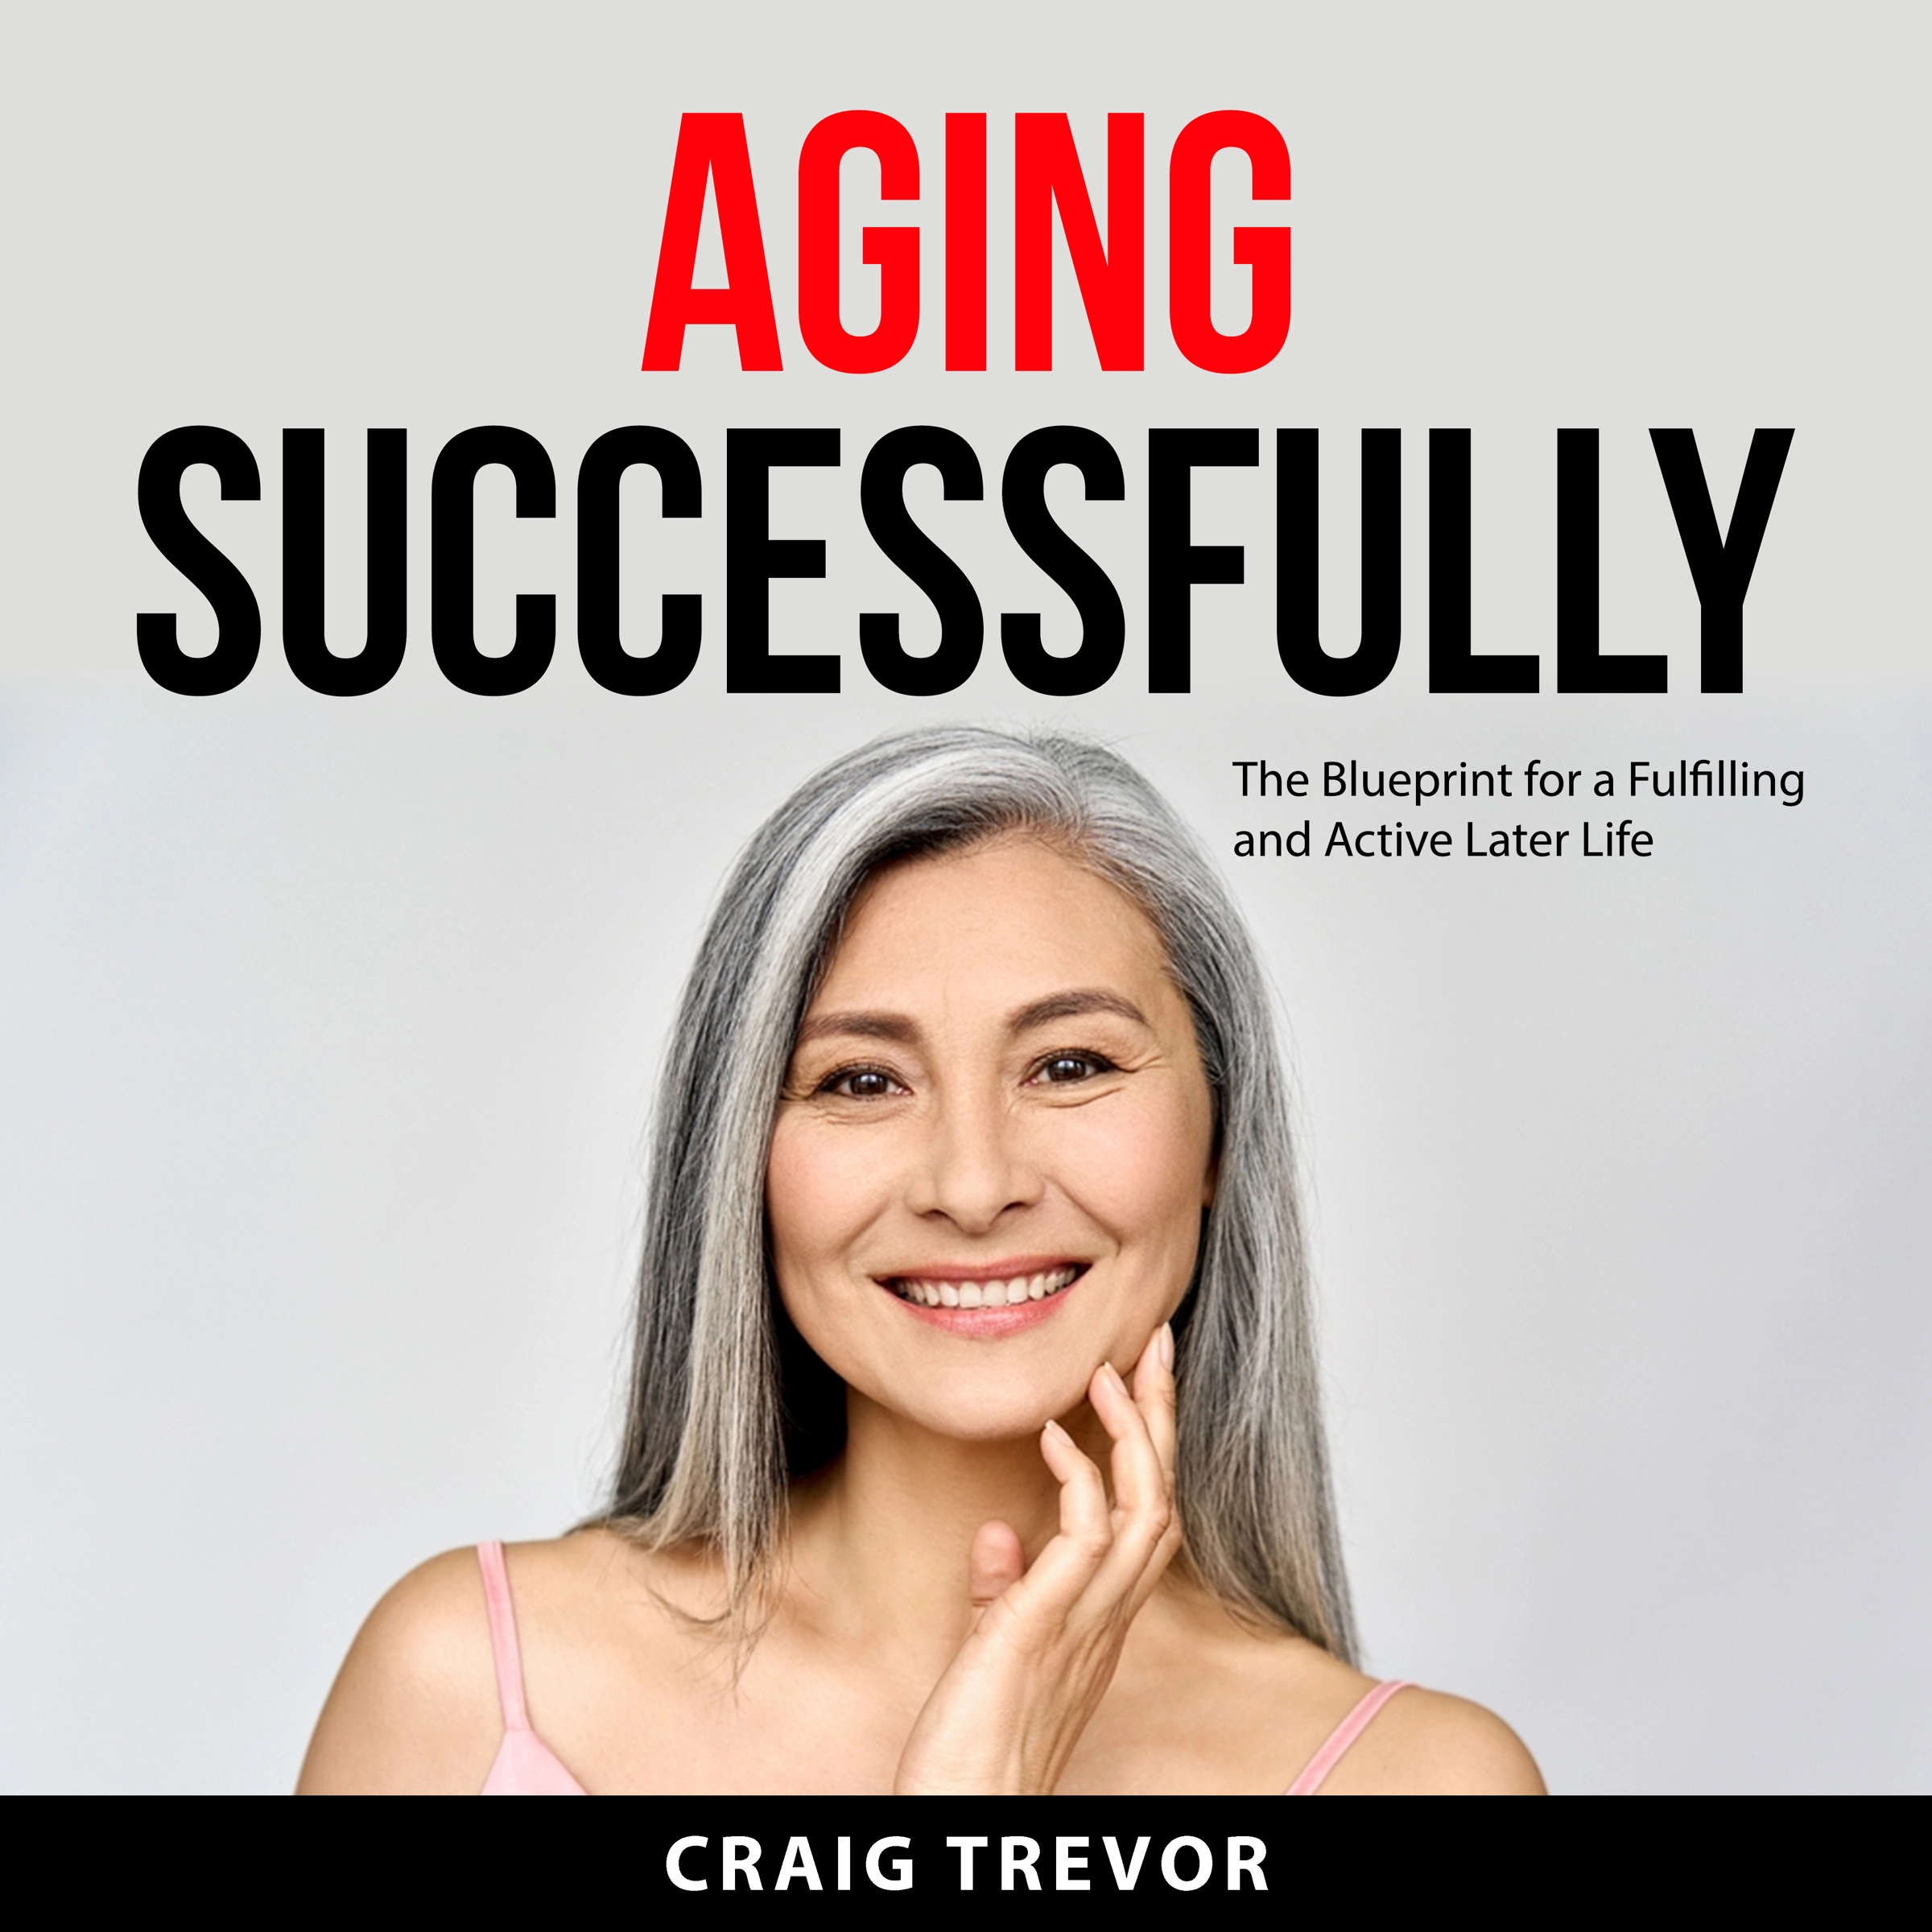 Aging Successfully Audiobook by Craig Trevor